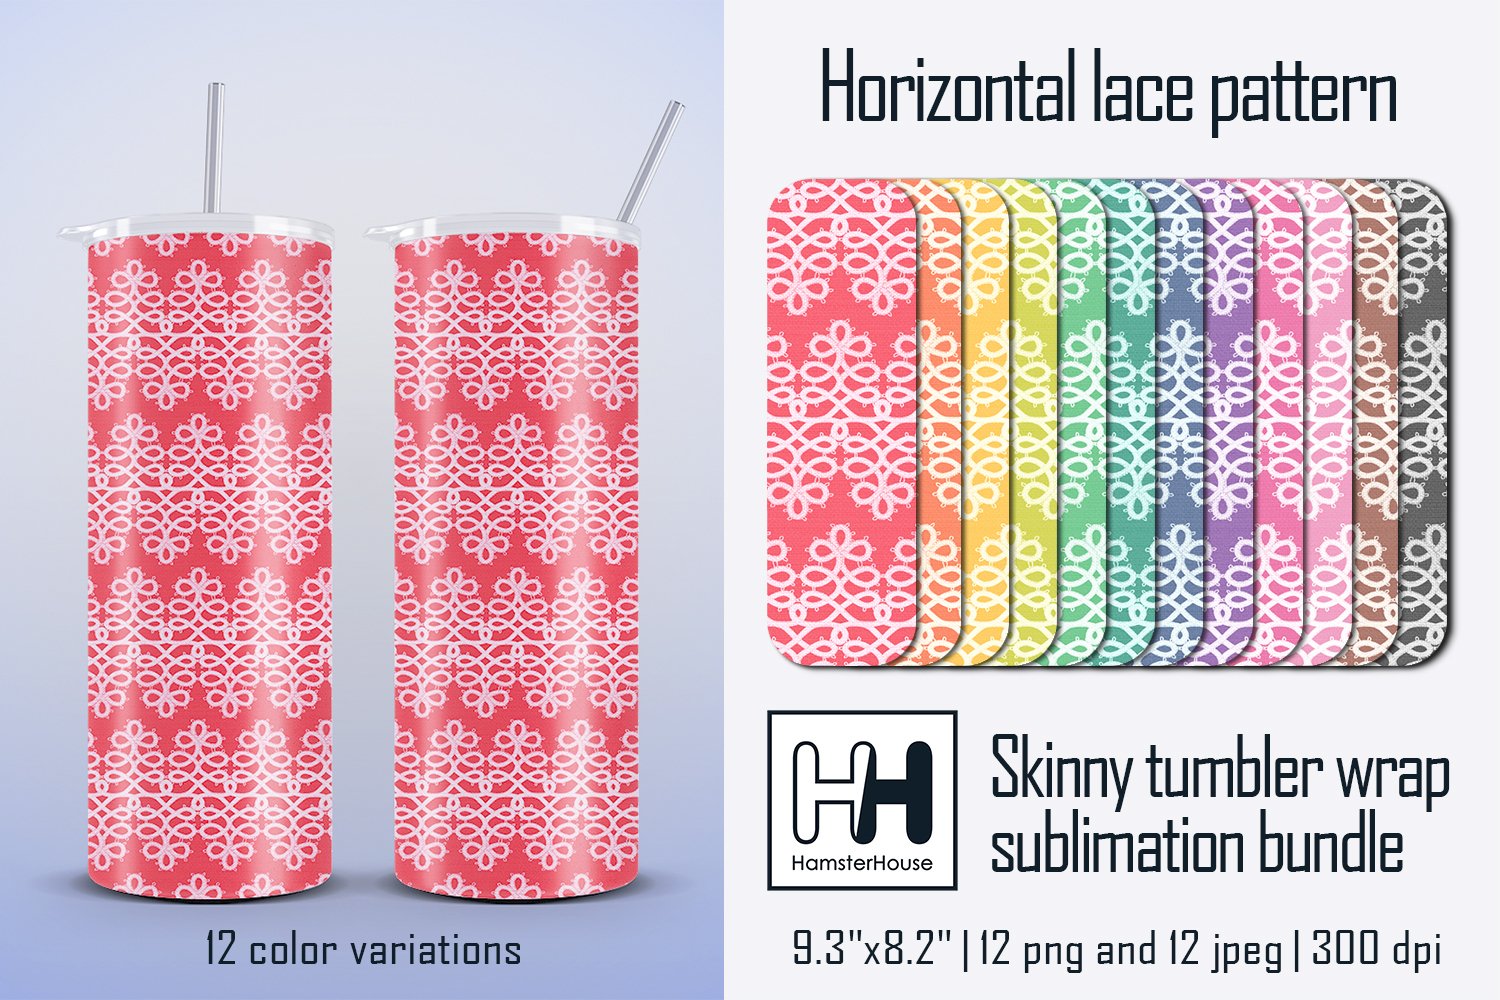 12 Color Variations Horizontal Lace Pattern, Skinny Tumbler Wrap Sublimation.